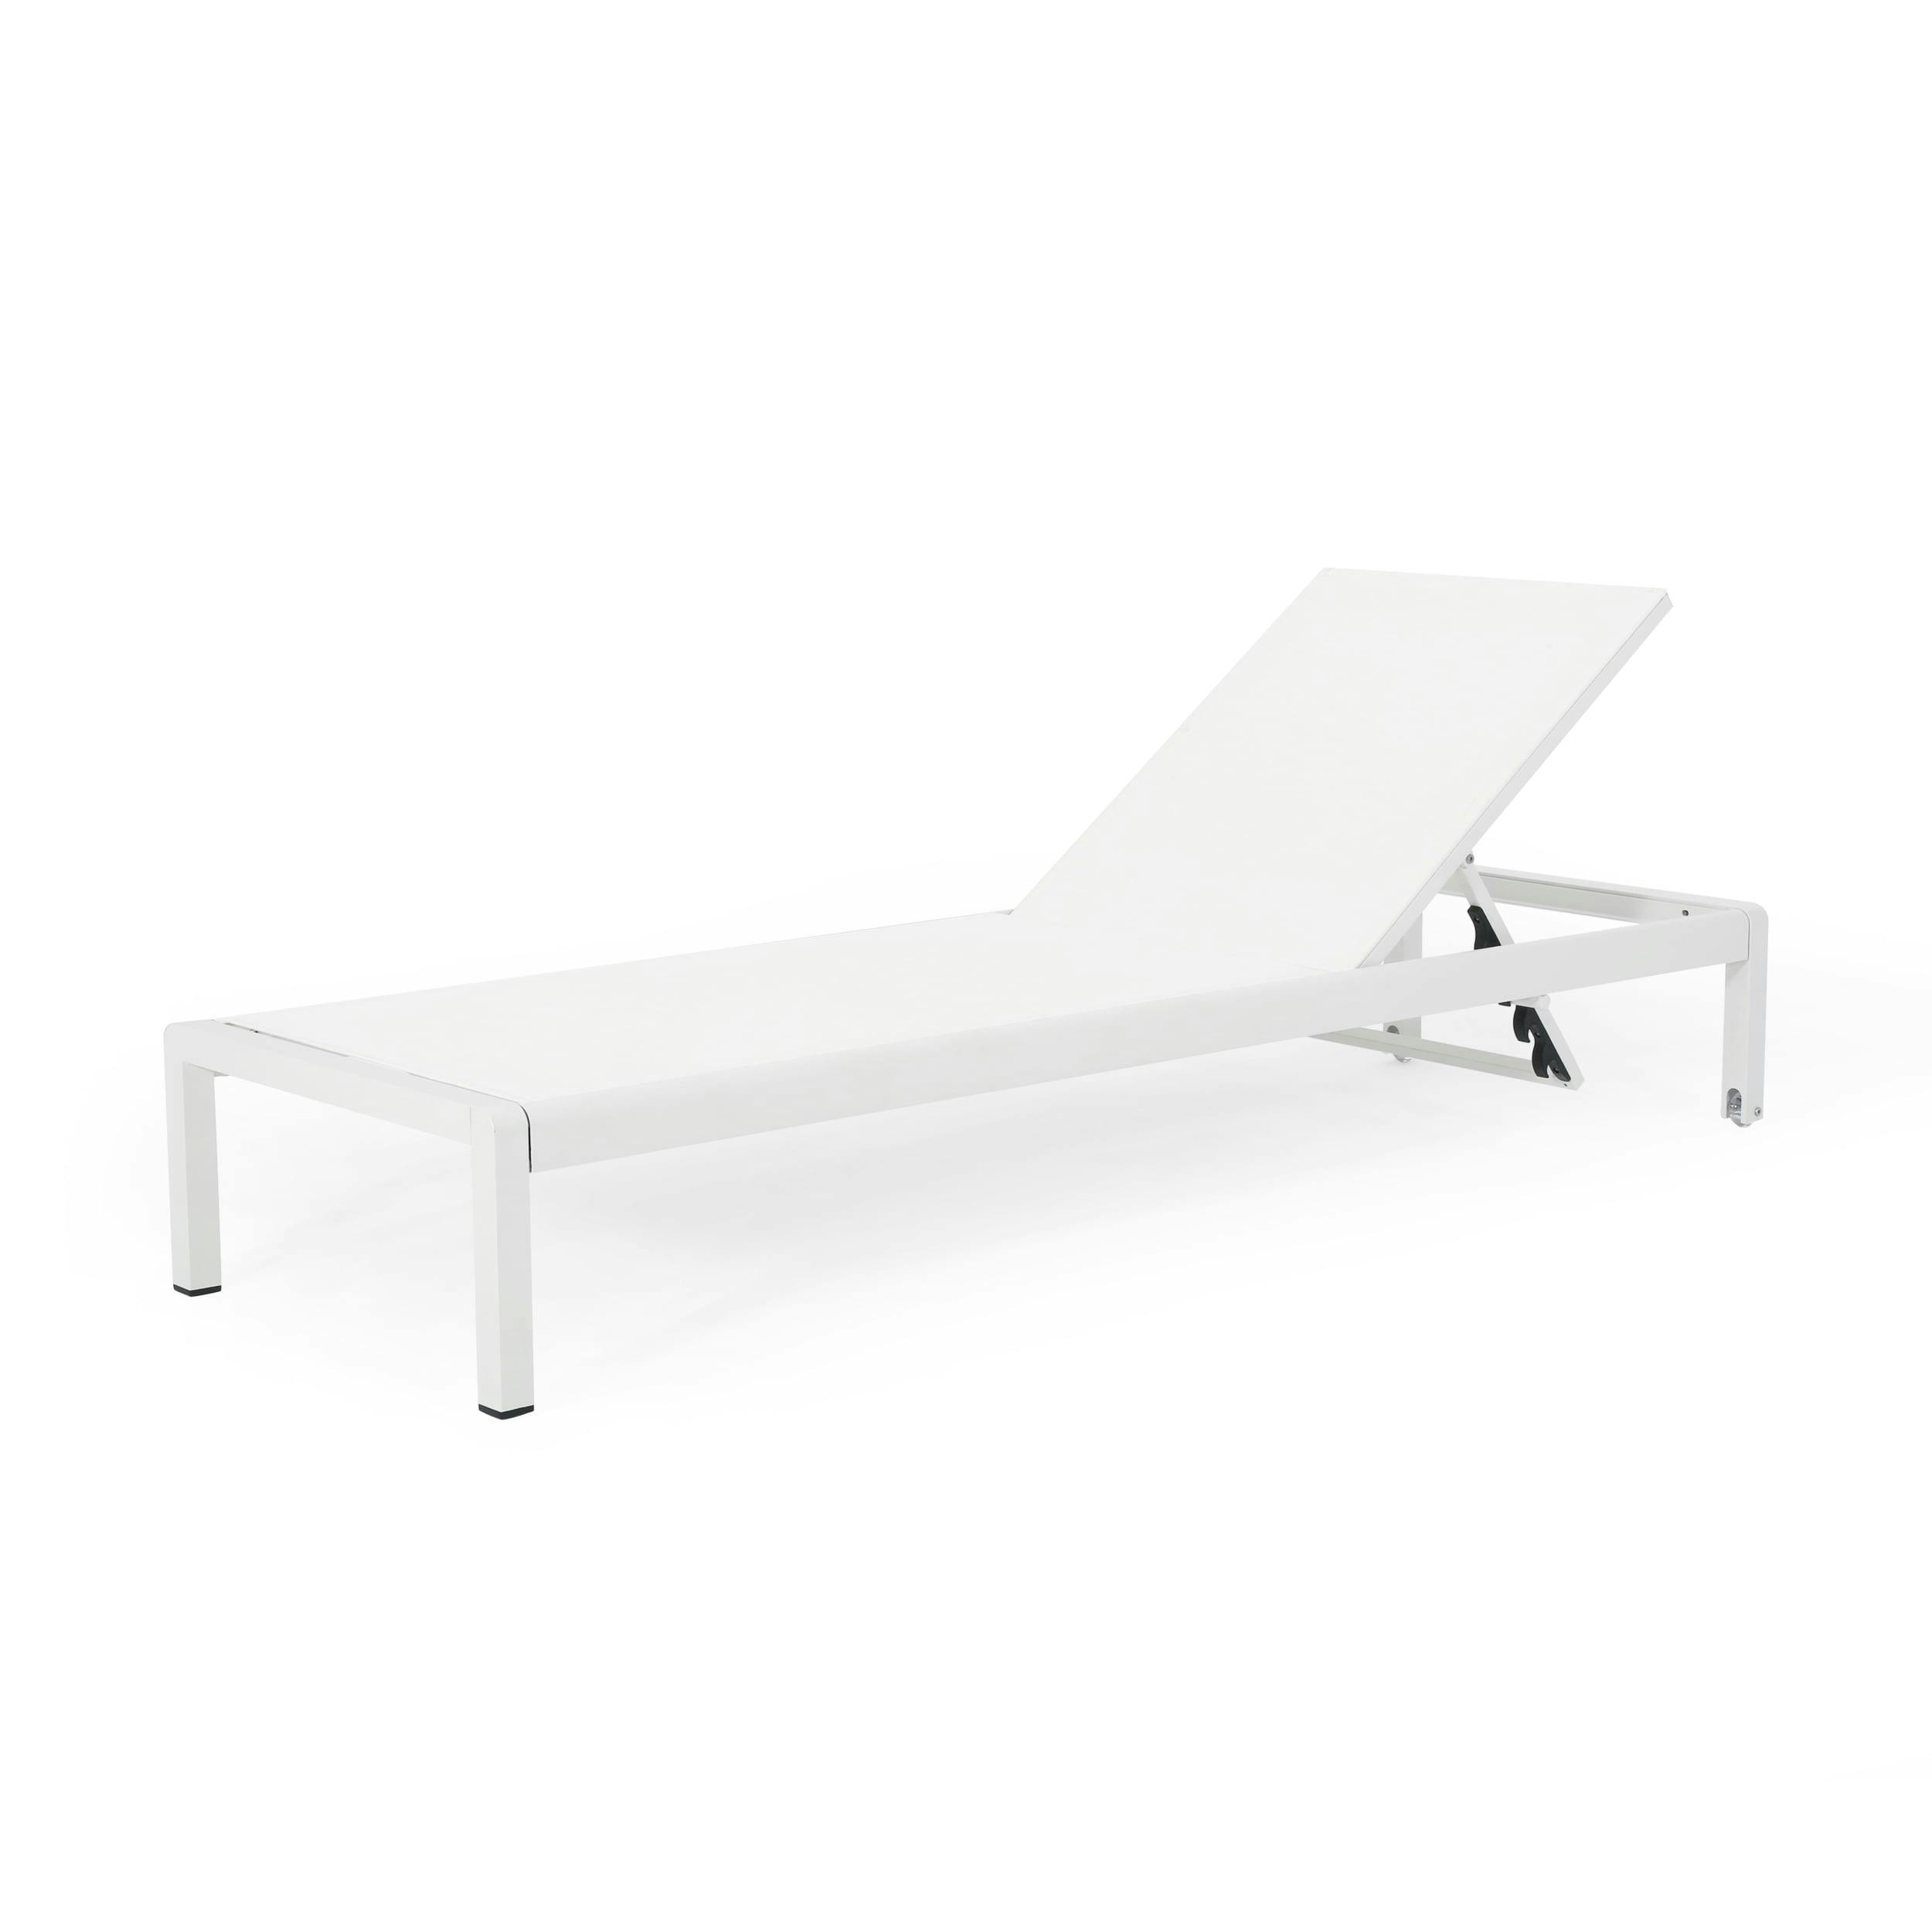 Coastal White Aluminum Outdoor Chaise Lounger with Mesh Seating